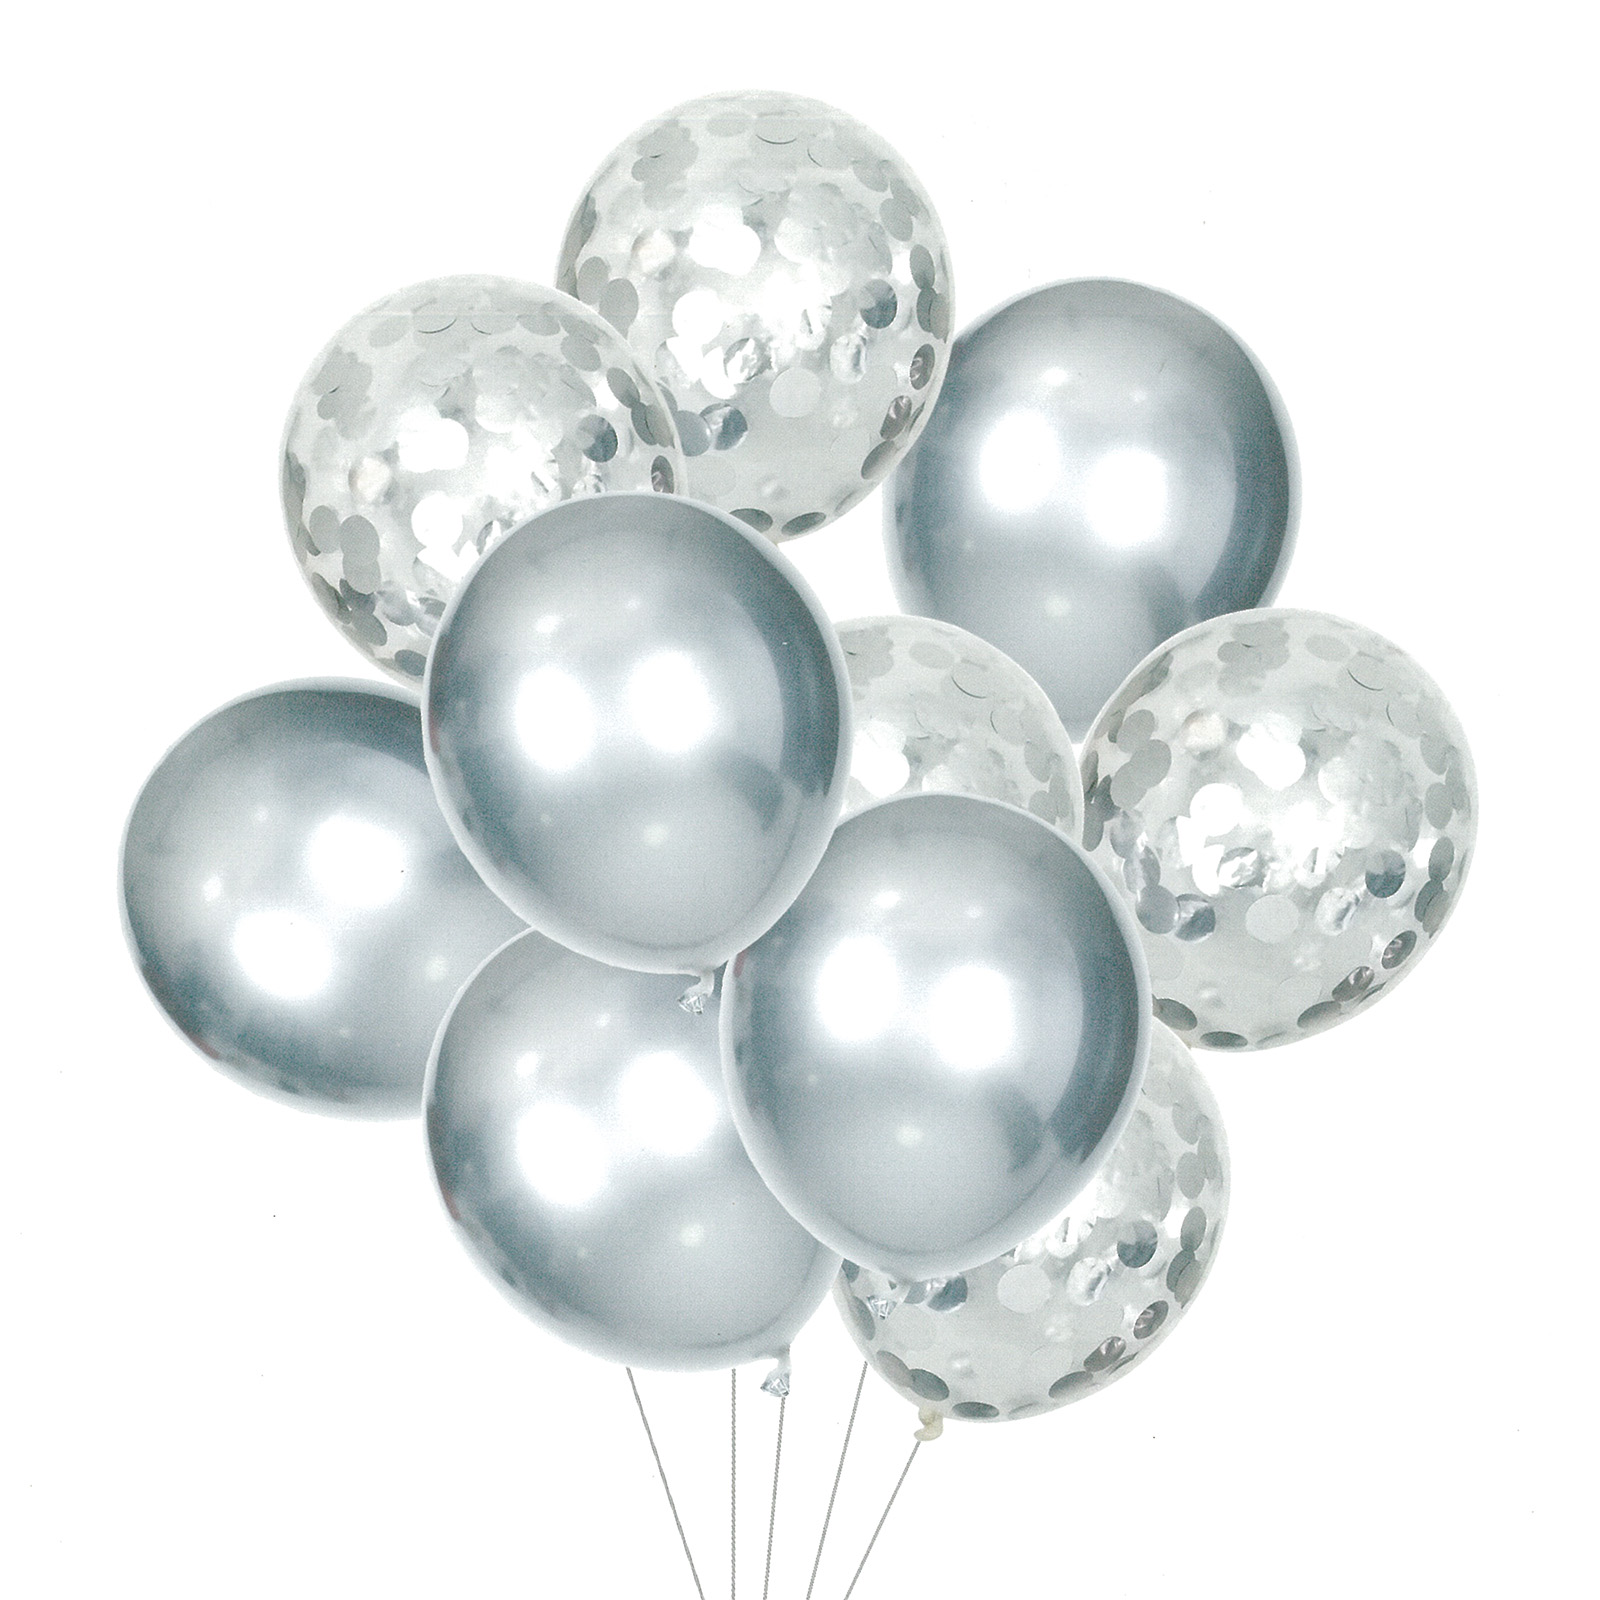 Balloons (Set of 10) - Silver with Glitters